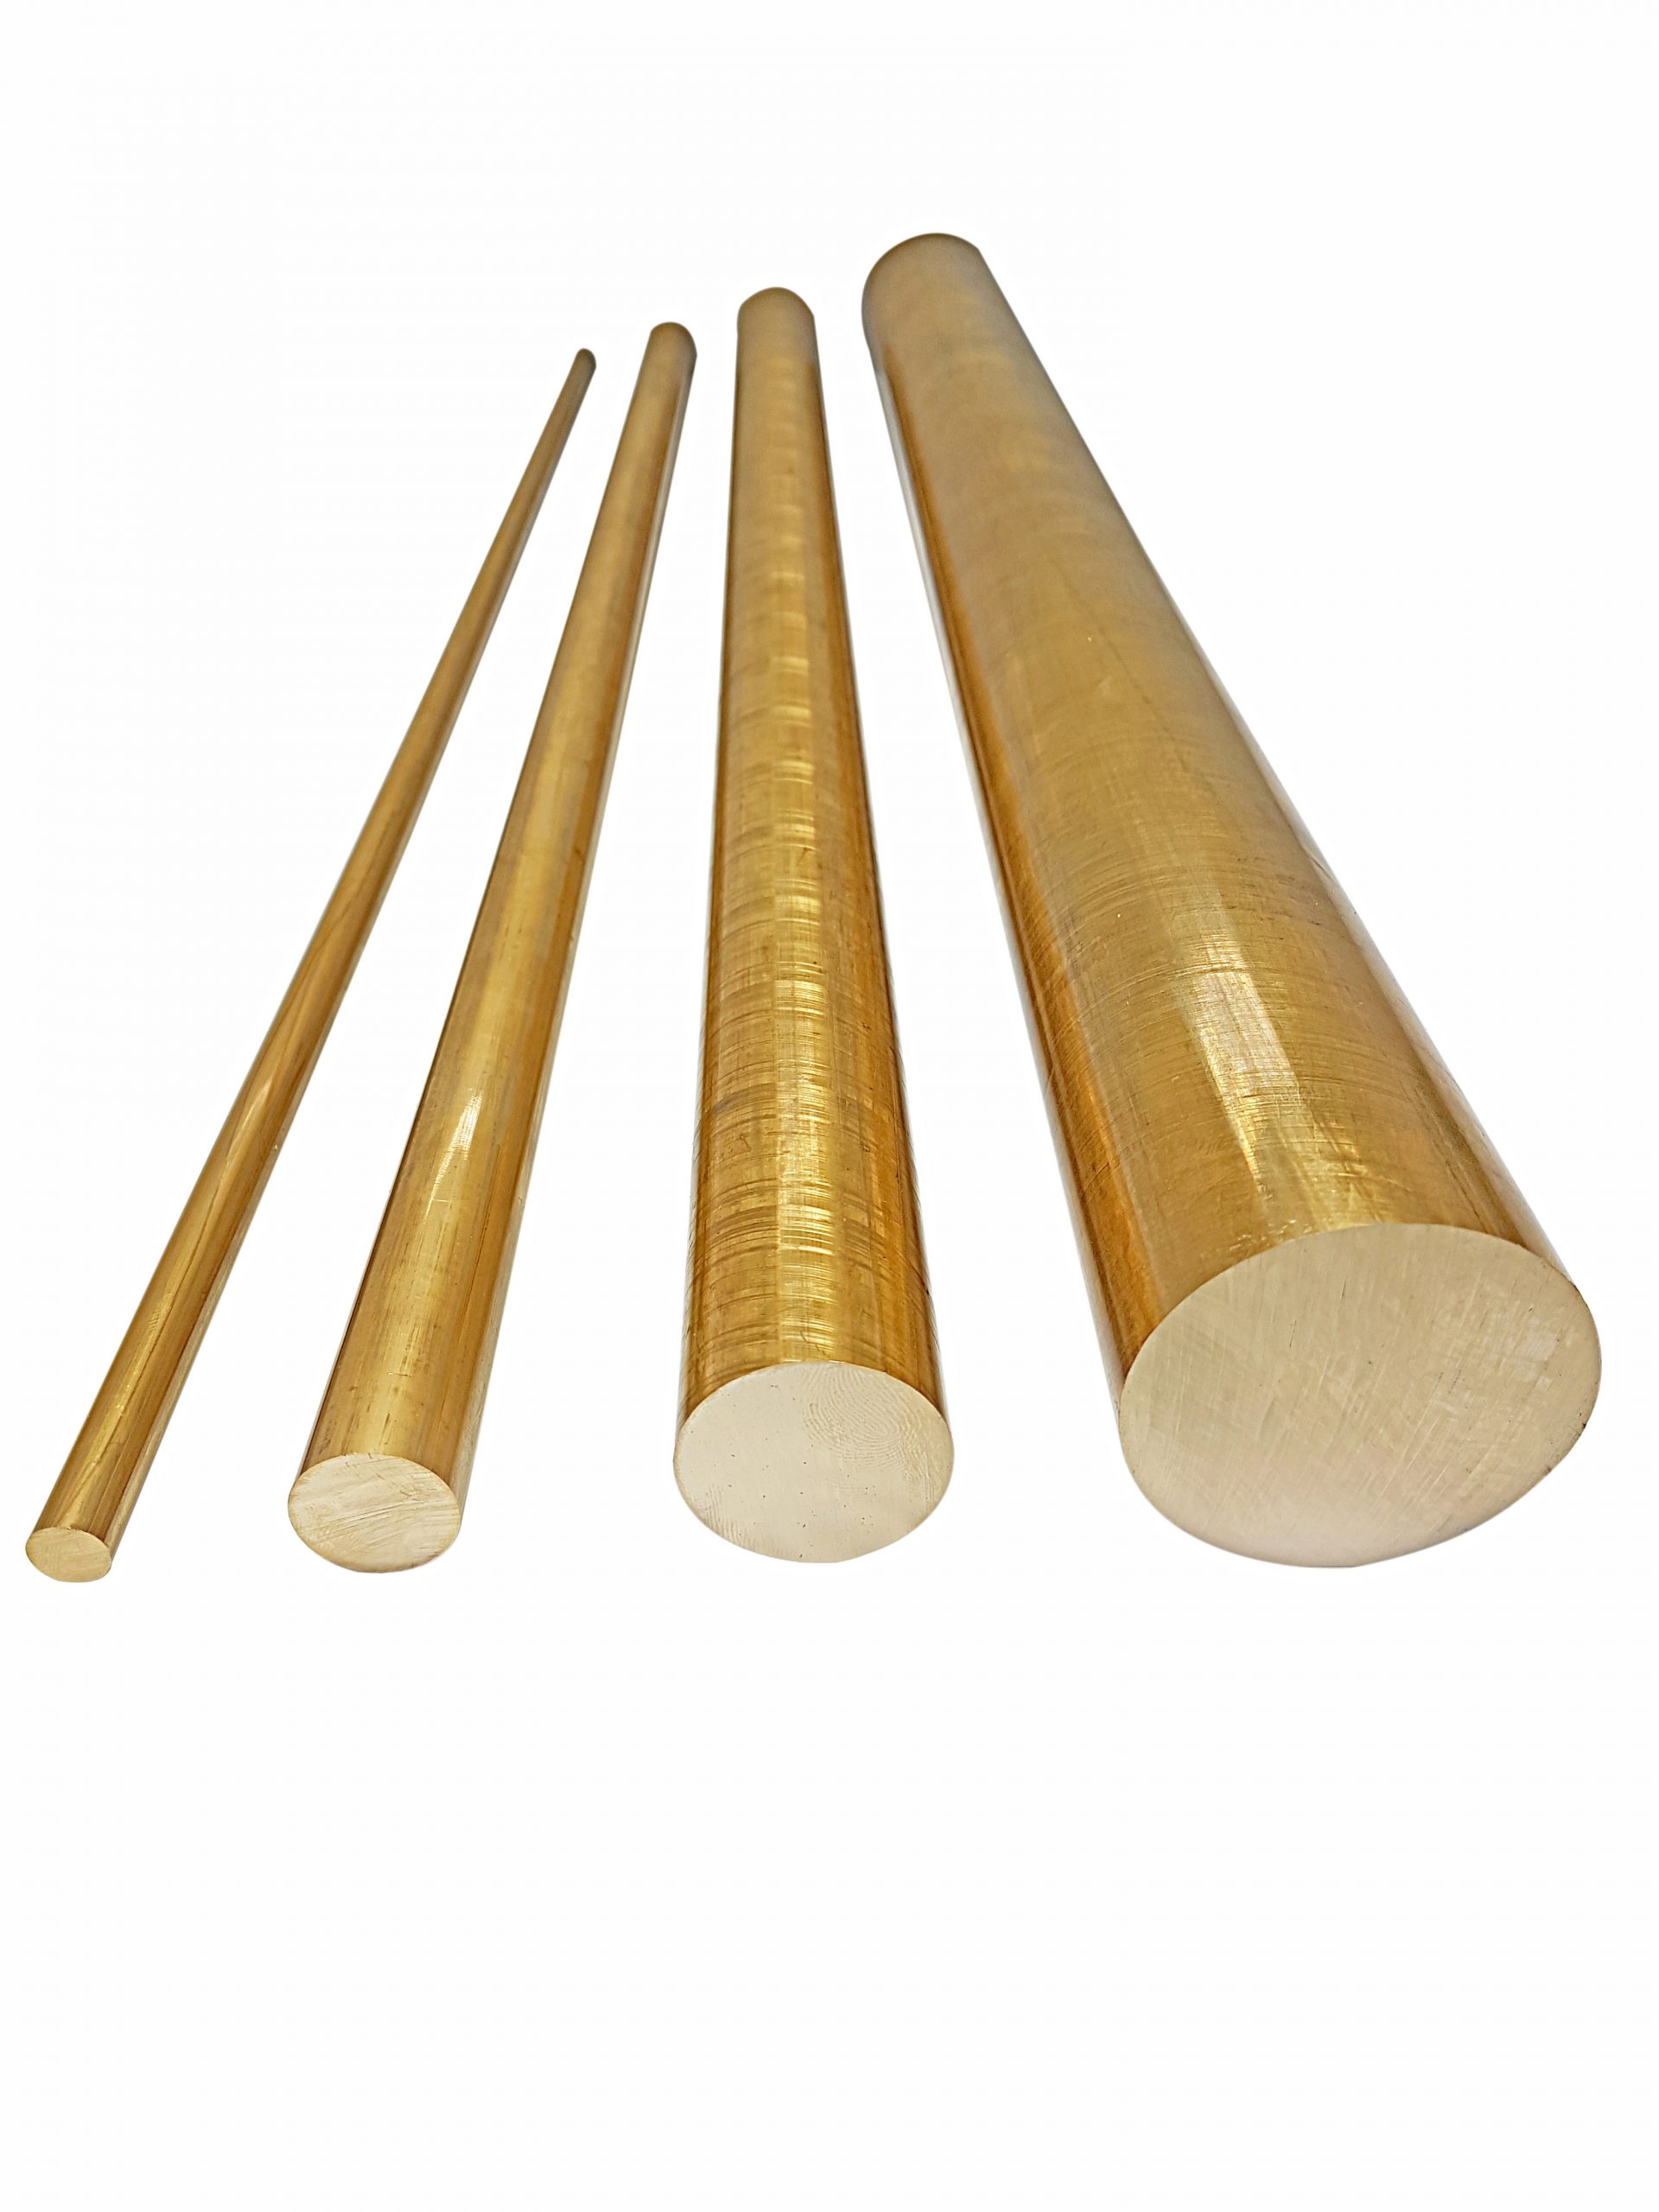 3 (76.2mm) Brass Round Bar, Free Delivery On £75 Spend